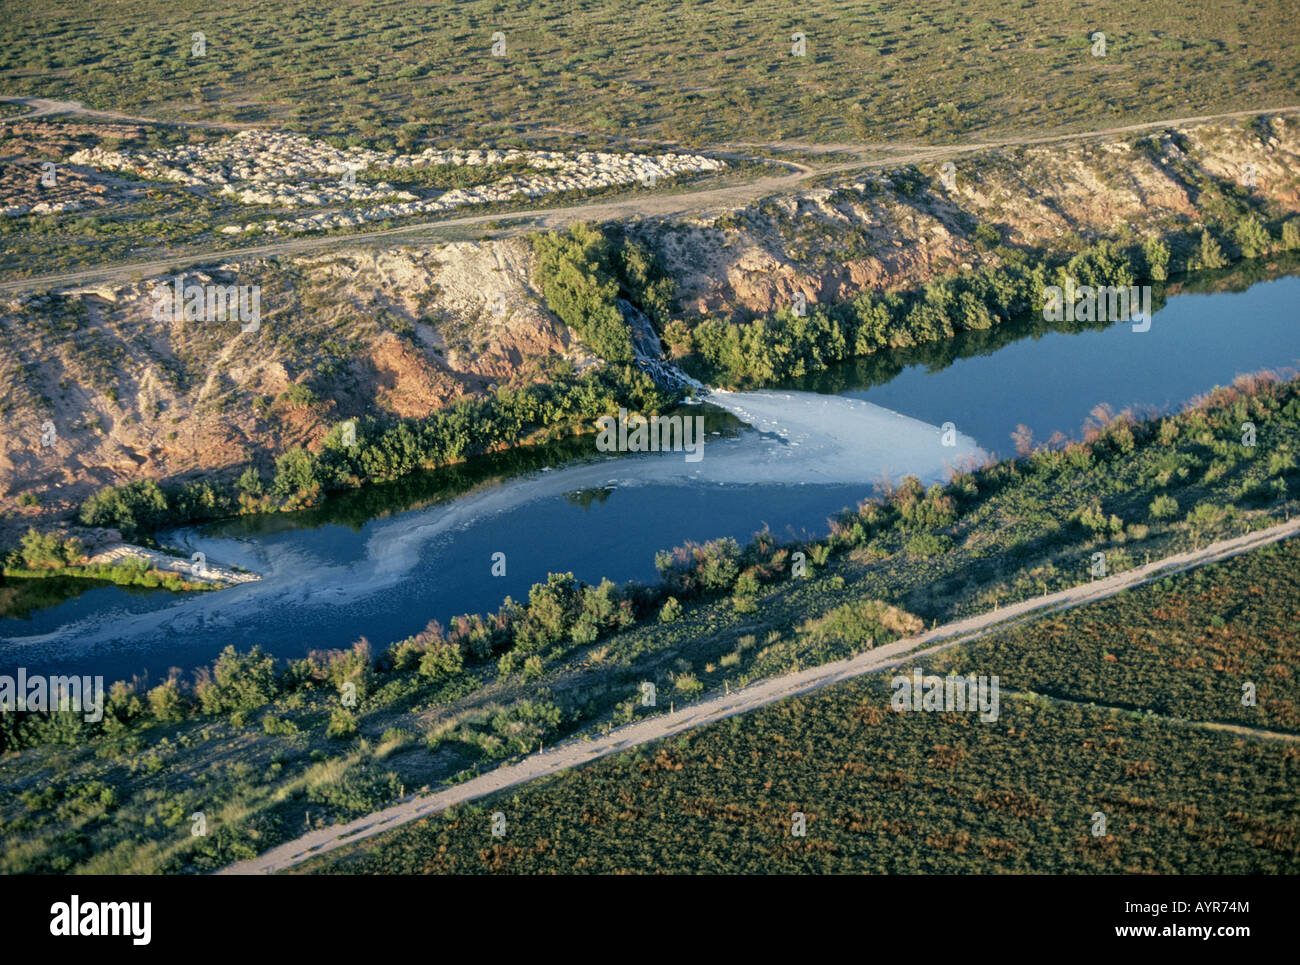 200+ Pecos River Stock Photos, Pictures & Royalty-Free Images - iStock